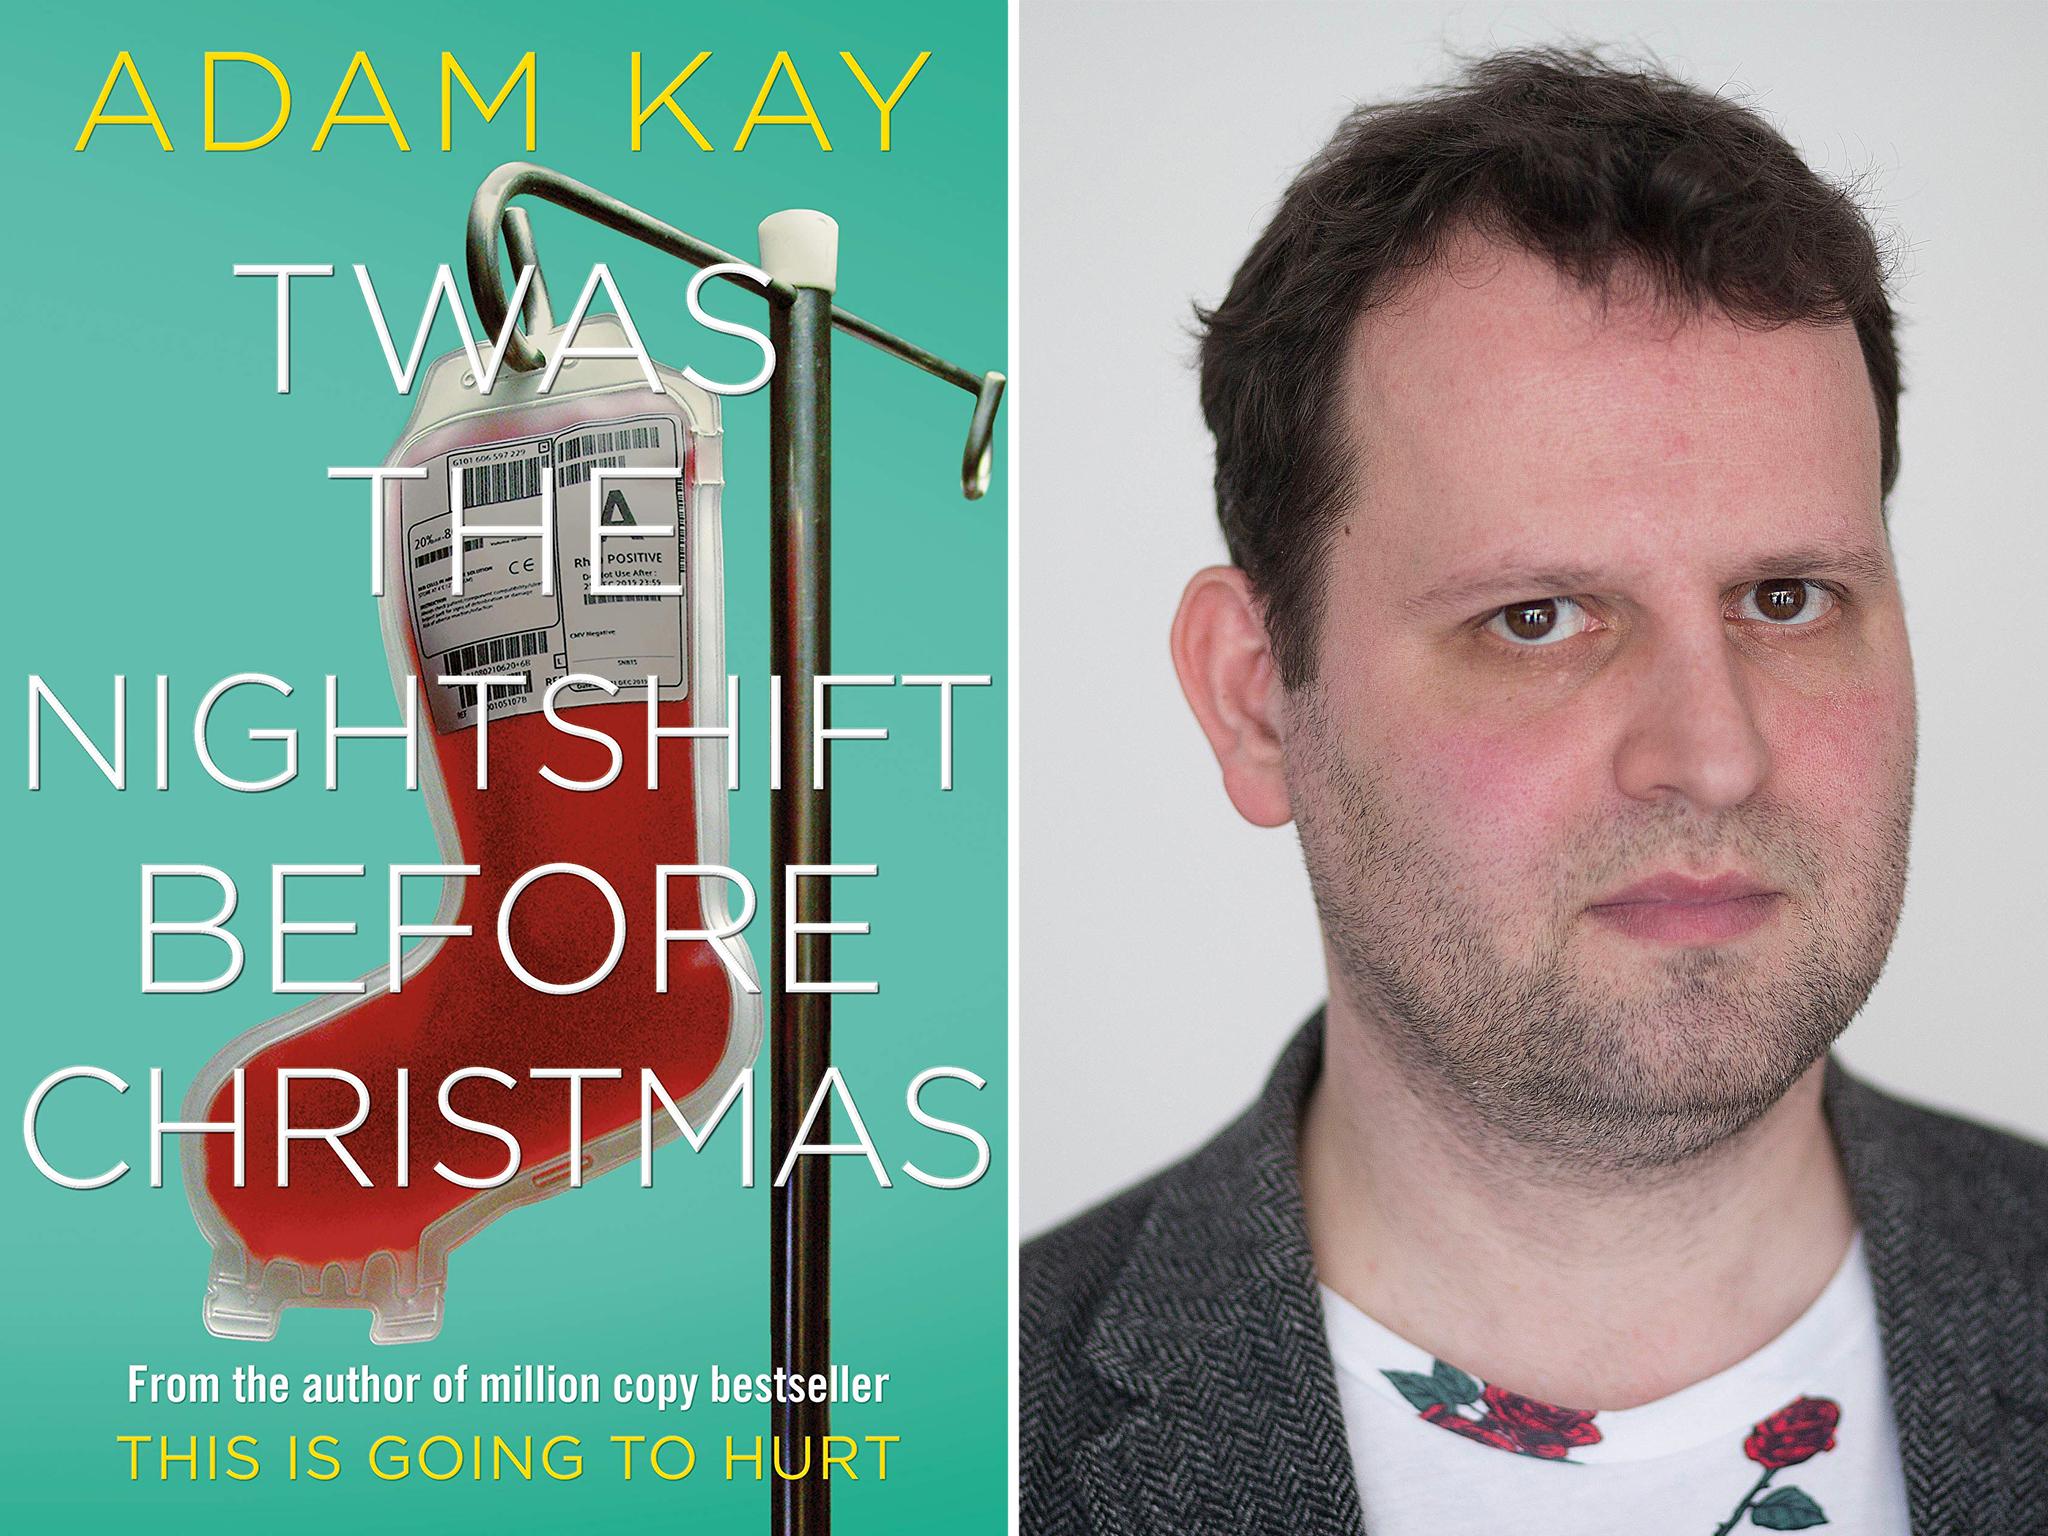 Adam Kay’s book is amusing, engagingly written and strangely cheery – but not a book to read aloud to your granny